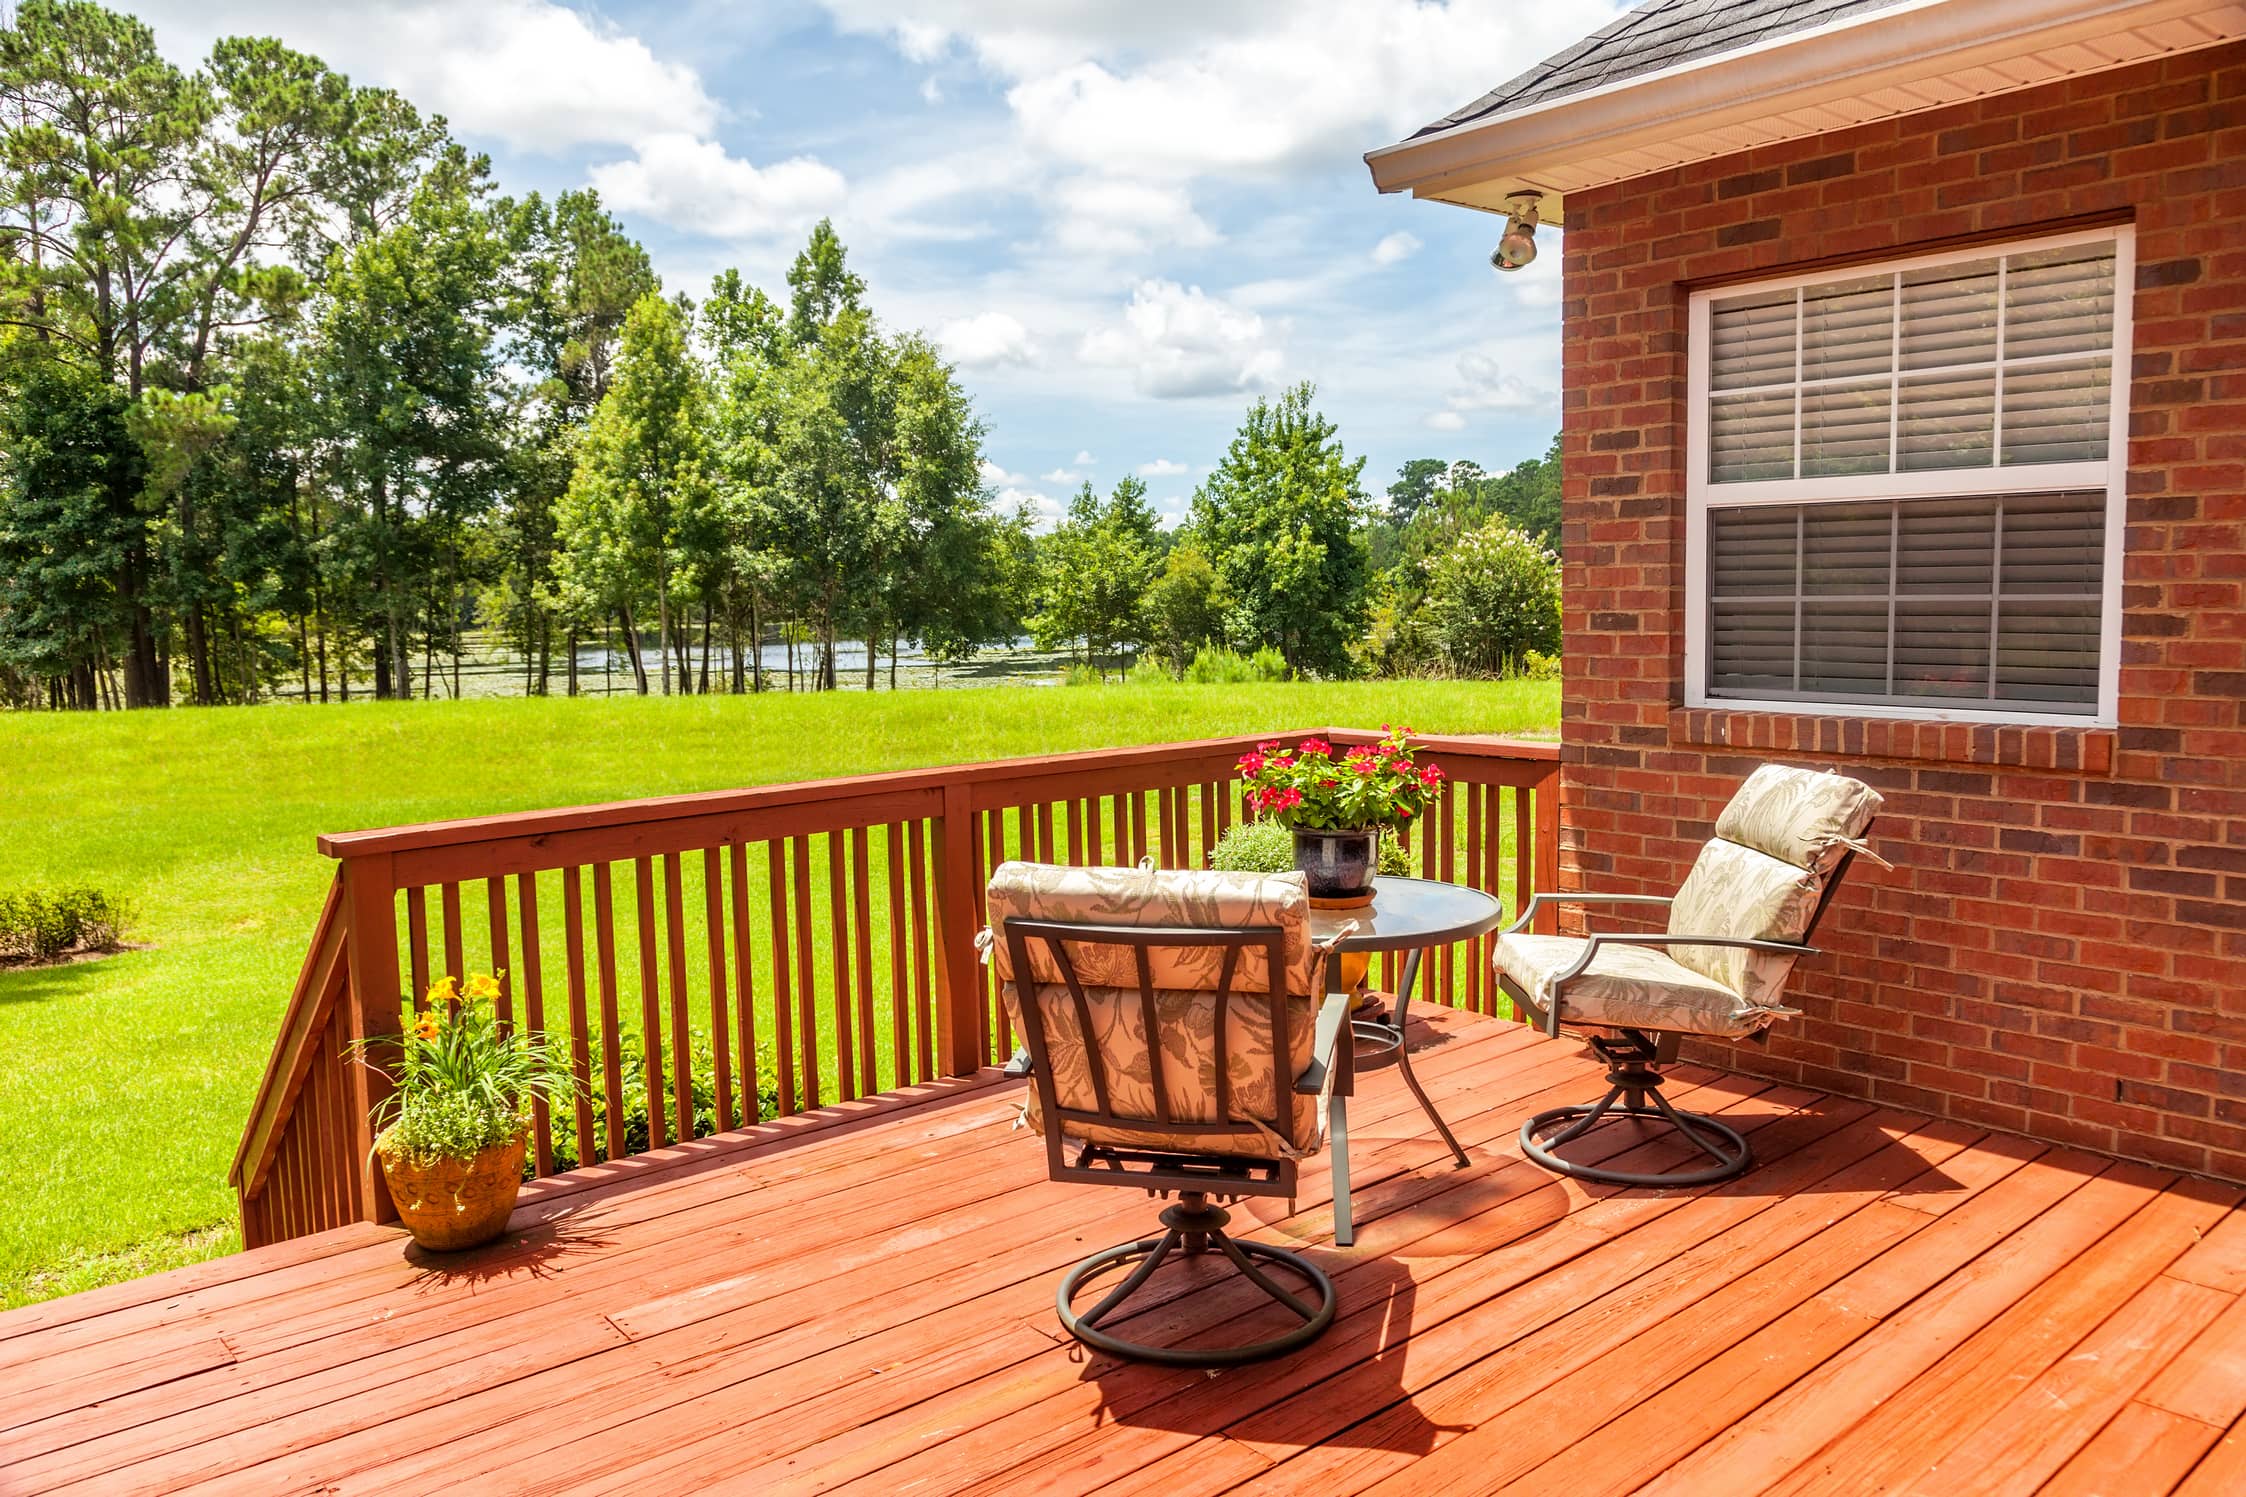 Image of a deck attached to a brick house with patio furniture next to a lawn and pond.